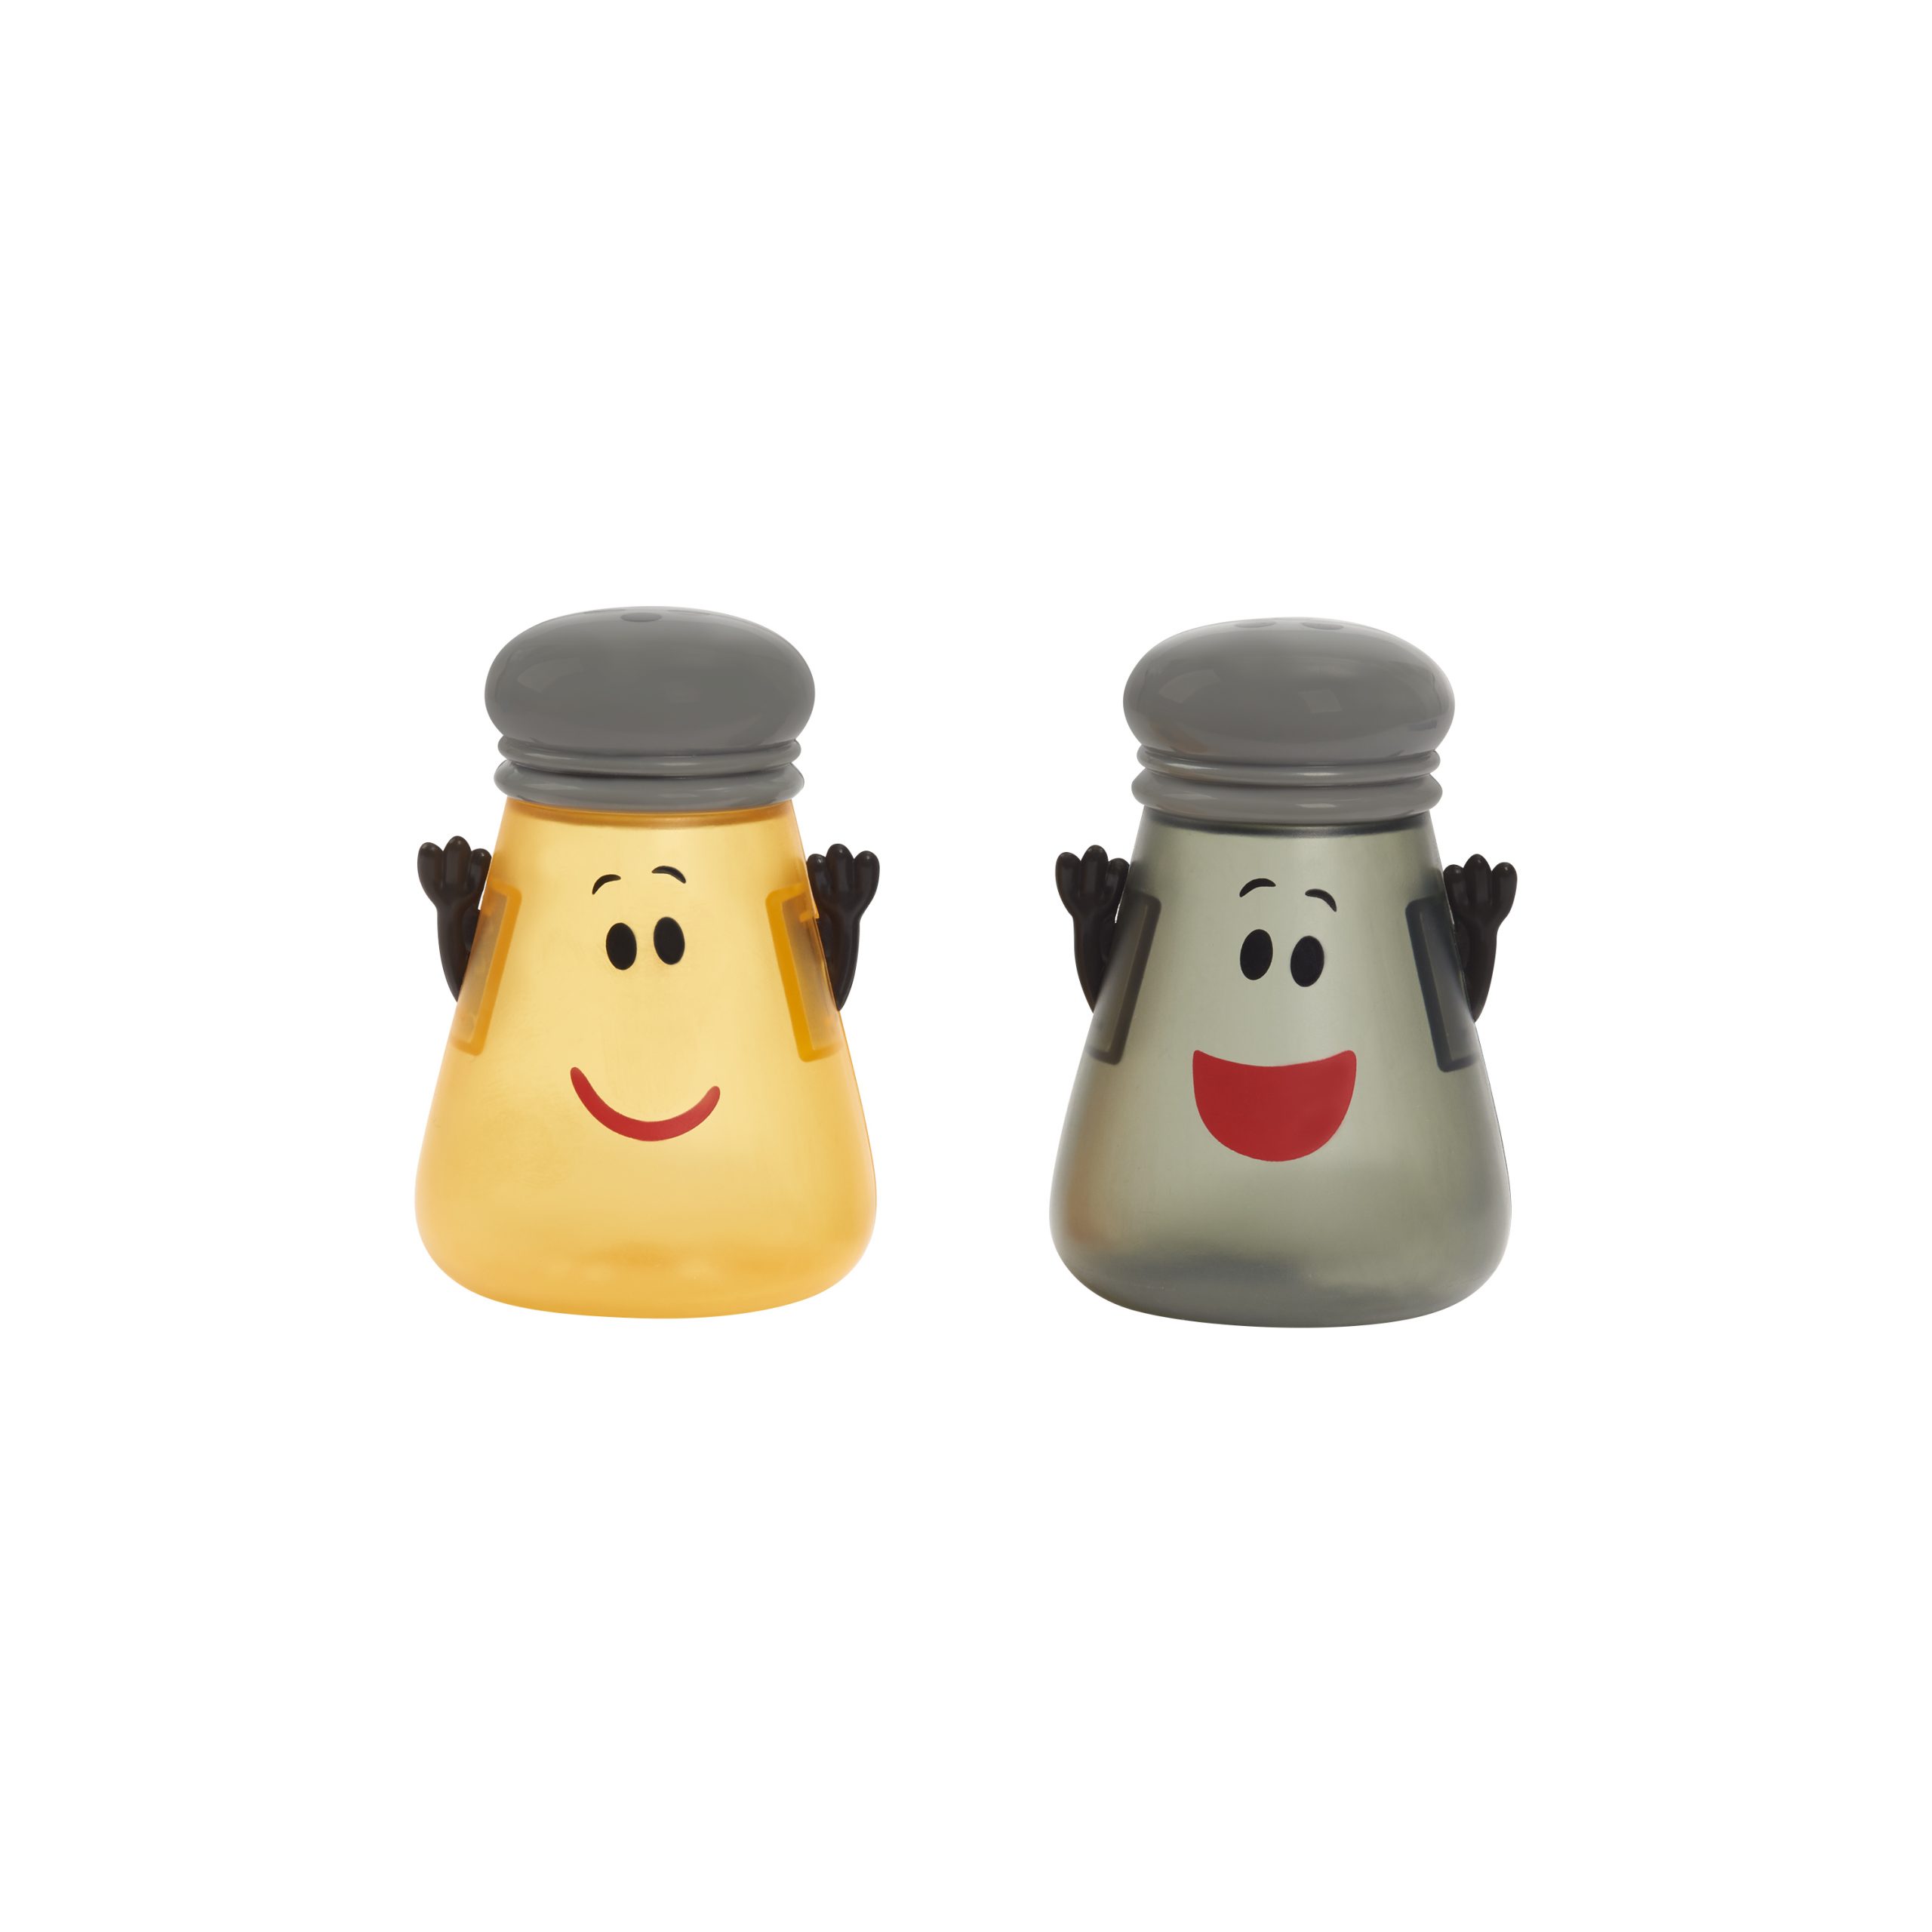 https://justplayproducts.com/wp-content/uploads/2020/06/49670_49671-Blues-Clues-and-You-Musical-Drum-Set-Mr.-Salt-and-Mrs.-Pepper-Shakers-Kohls-Out-of-Package-1-scaled.jpg